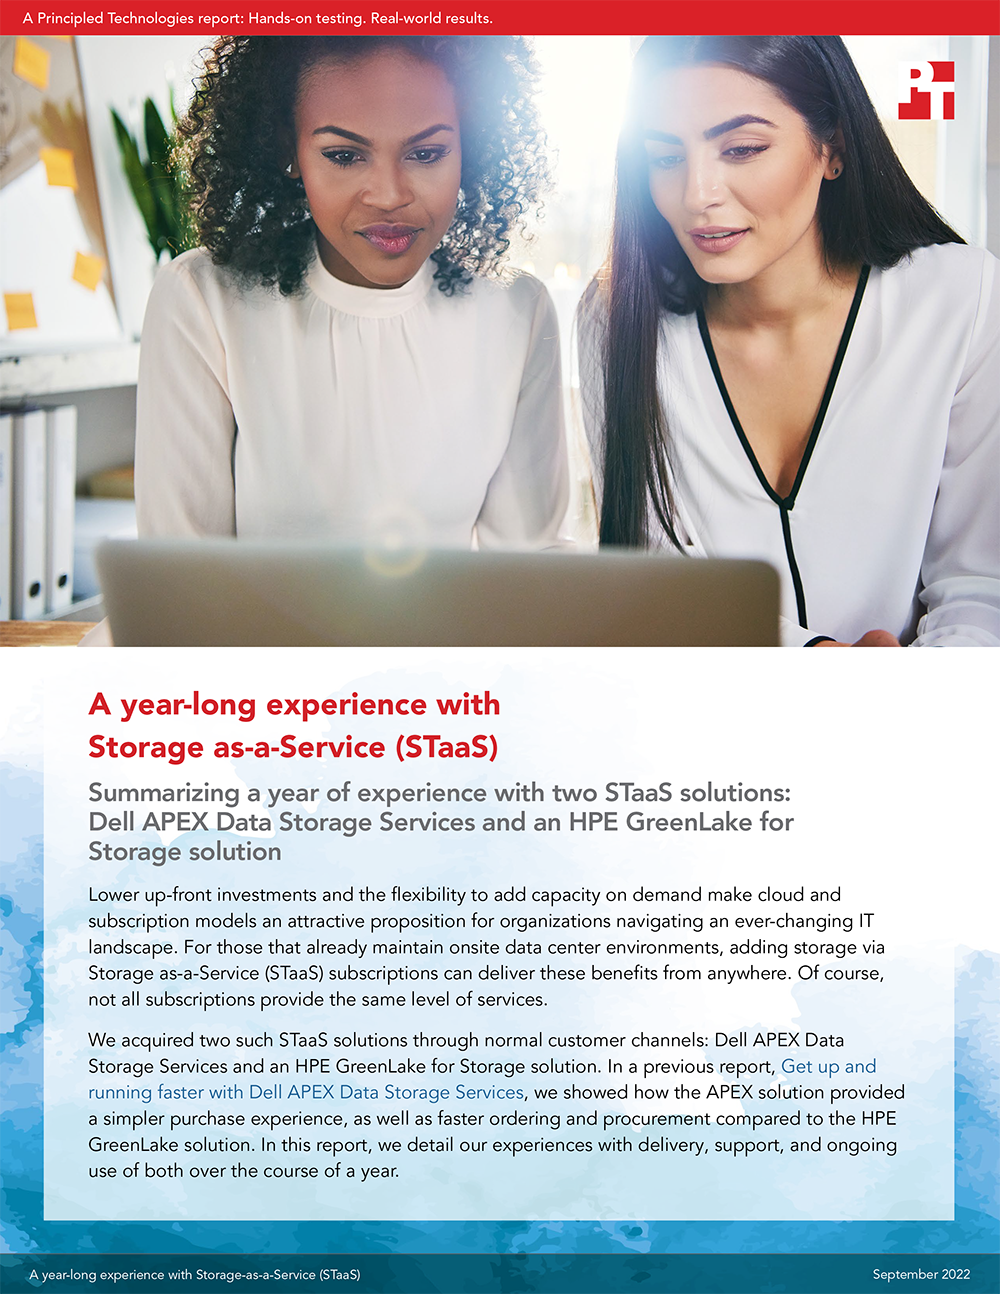 A year-long experience with Storage as-a-Service (STaaS)